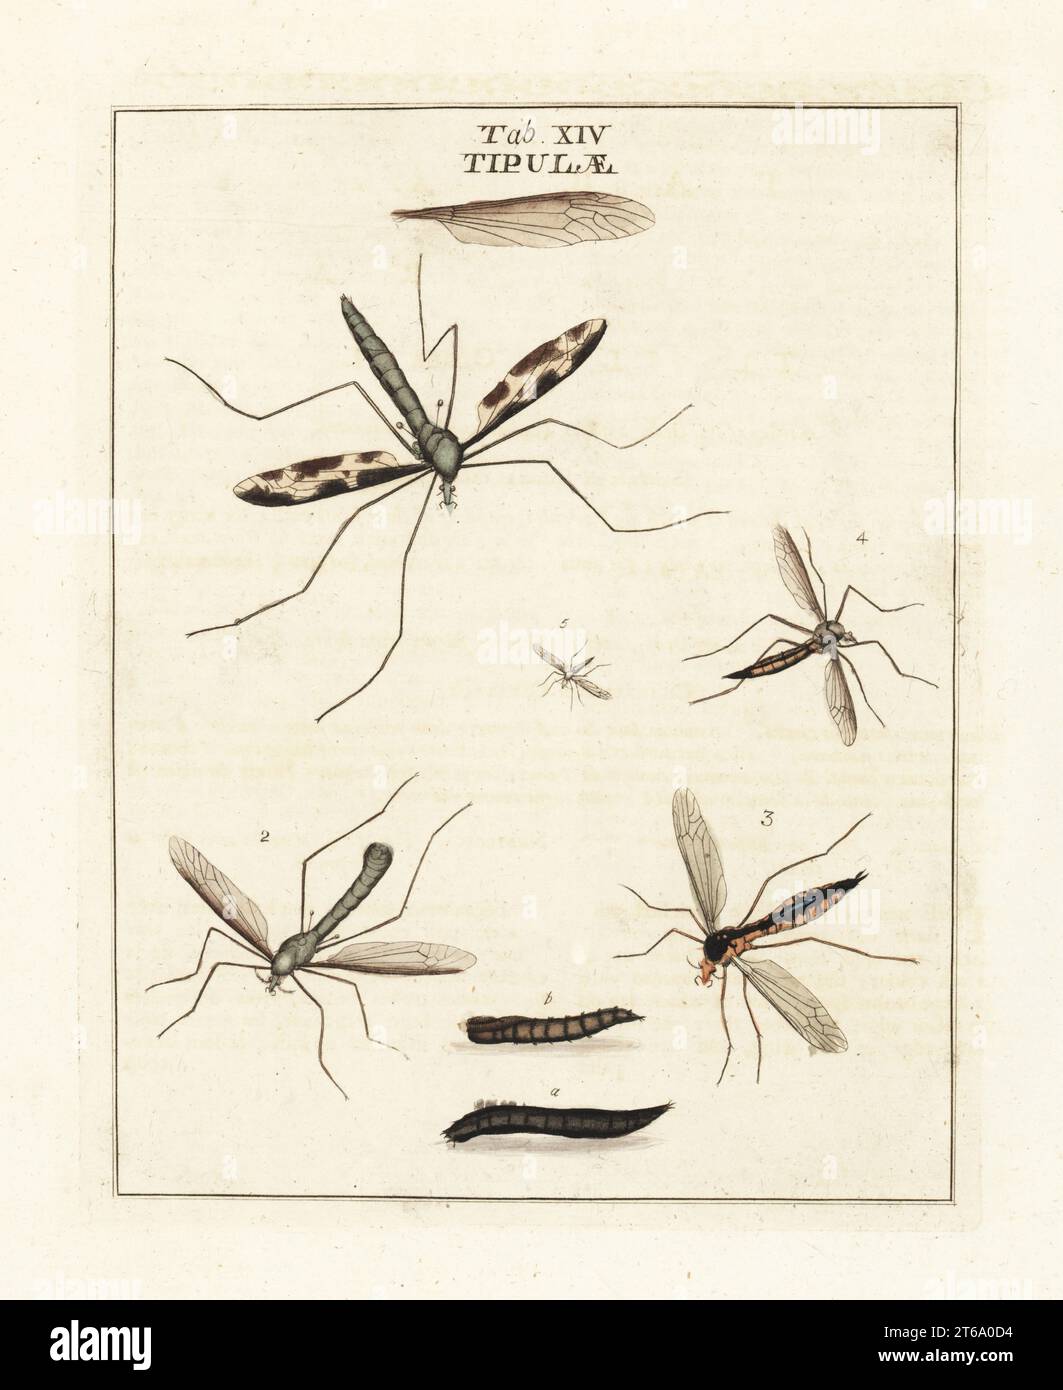 Cranefly species, Tupila maxima 1, Limonia stigma 2, Ctenophora pectinicornis 3, Tipula vernalis 4, and winter crane fly or tell-tale, Trichocera (Trichocera) saltator 5. Diptera. Tipulidae. Handcoloured copperplate engraving drawn and engraved by Moses Harris from his own Exposition of English Insects, Including the several Classes of Neuroptera, Hymenoptera, Diptera, or Bees, Flies and Libellulae, White and Robson, London, 1782. Stock Photo